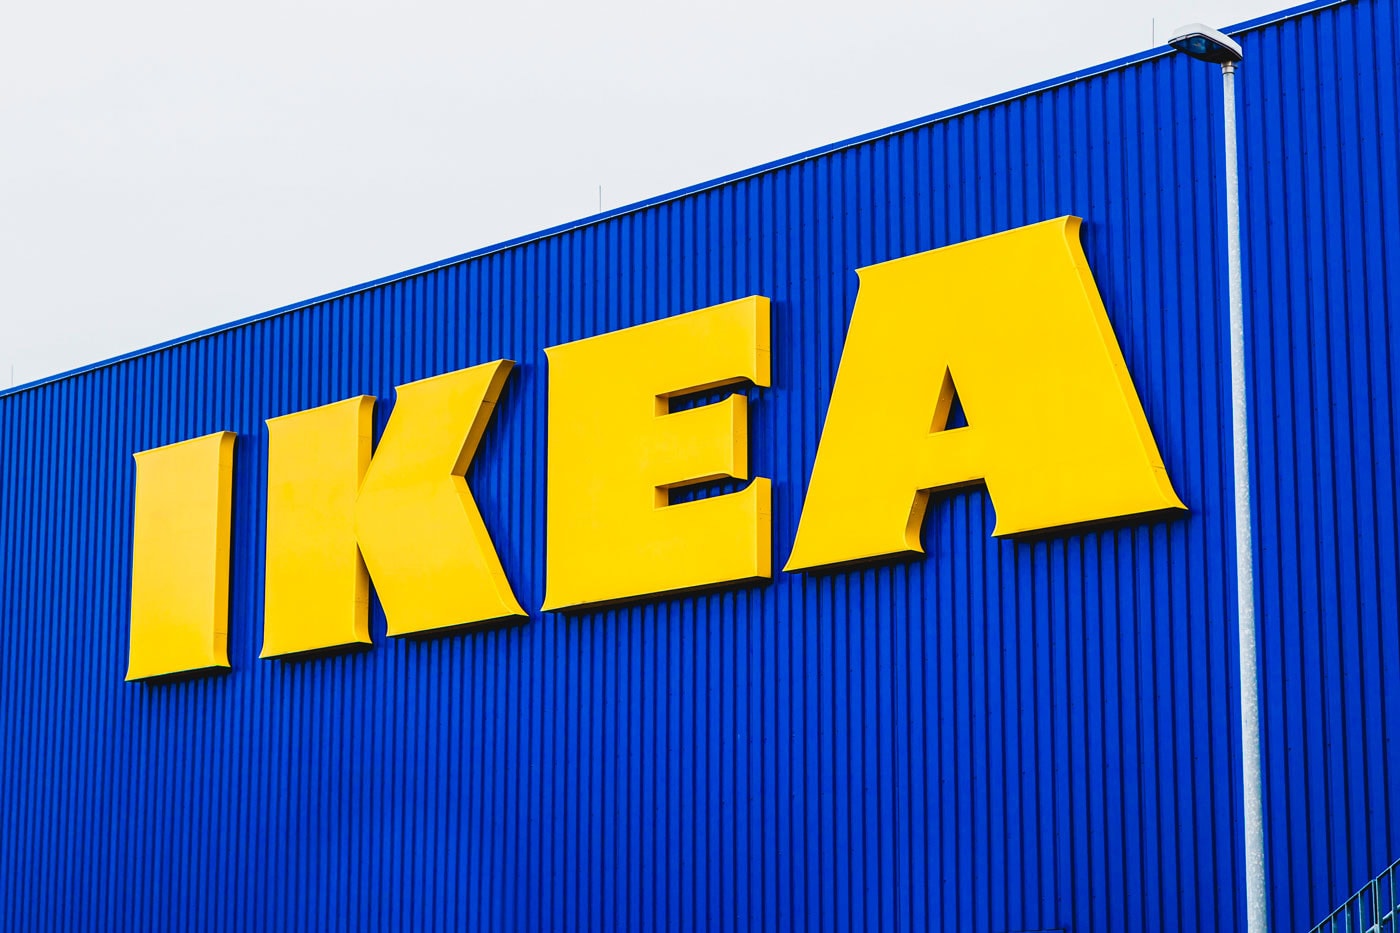 IKEA augmented reality app shoppable buy shop furniture online through movile iphone android details design interior